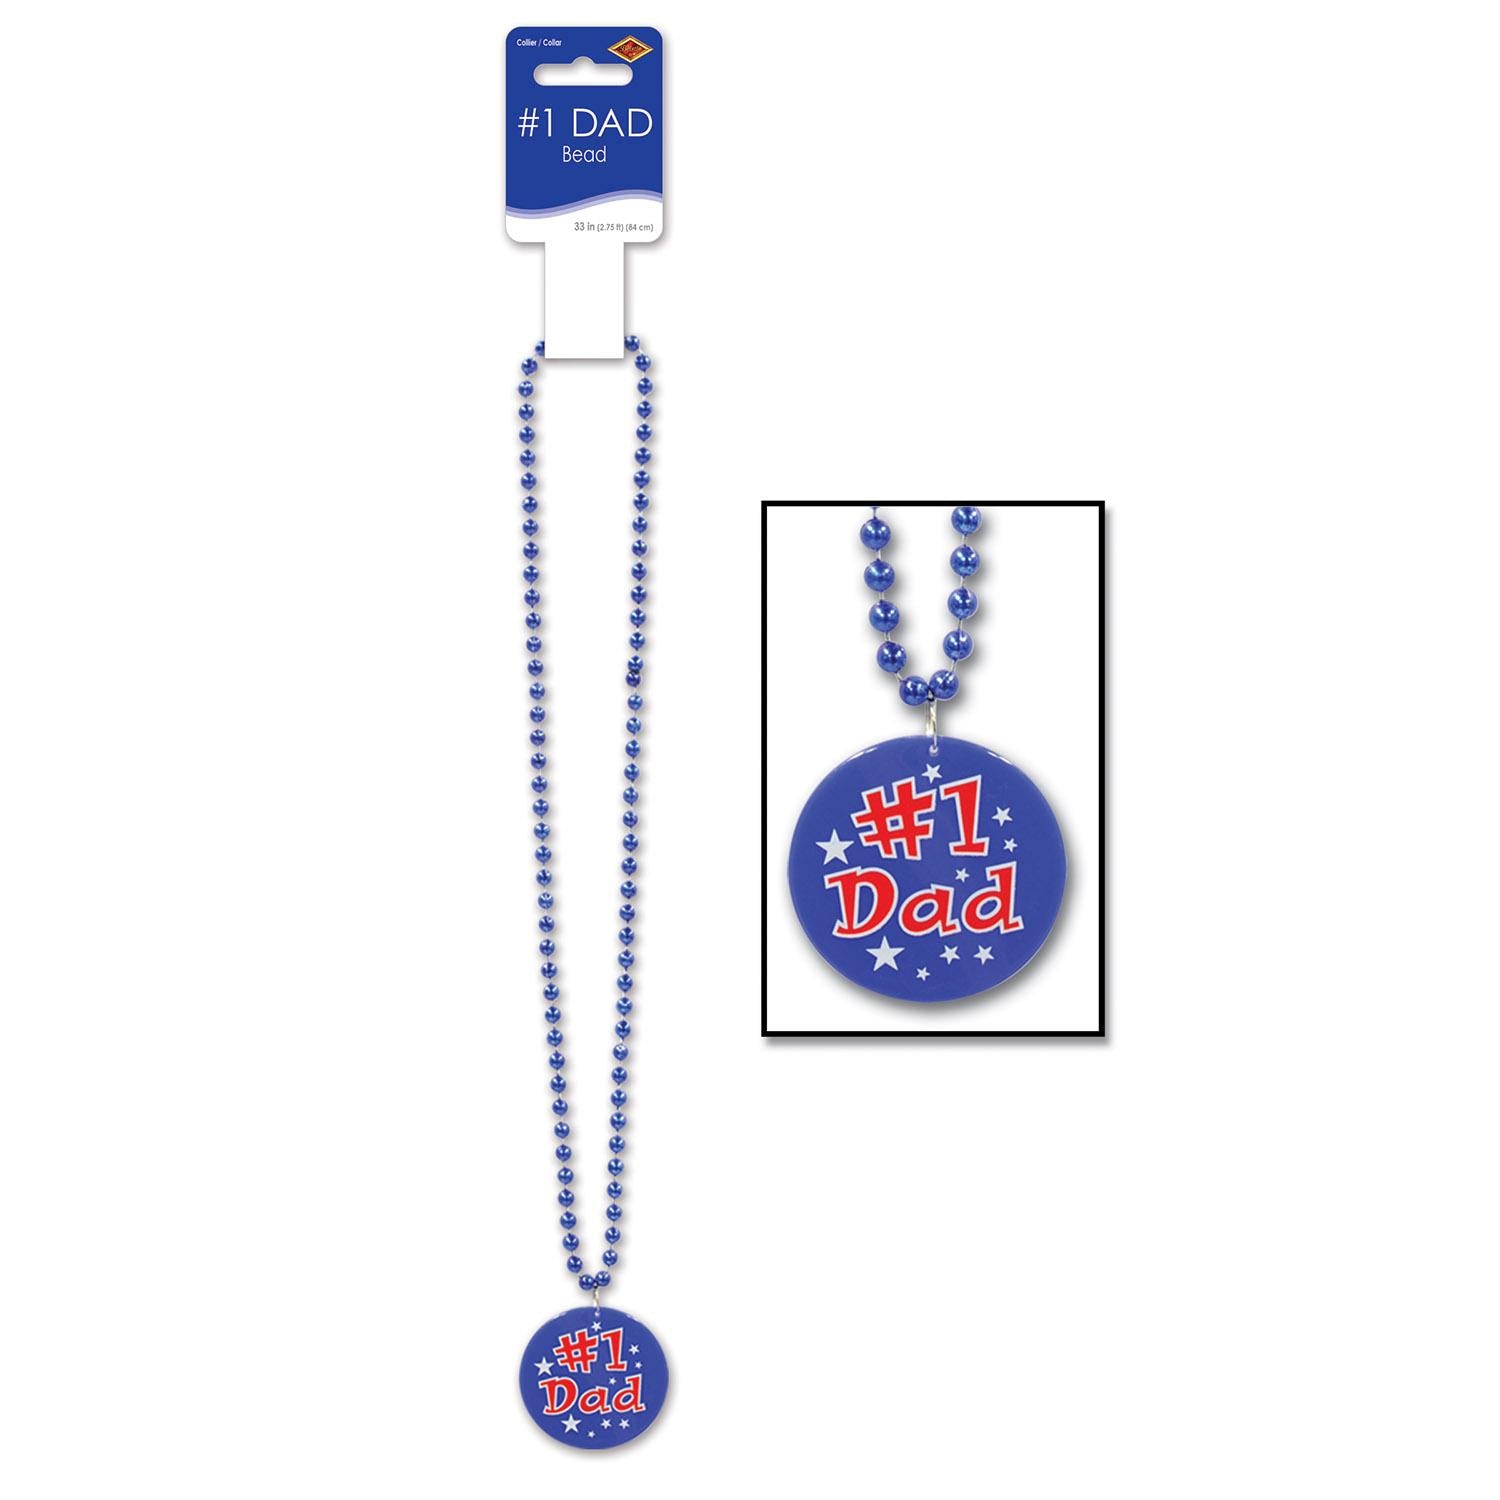 Father's Day Bead Necklaces with Printed #1 Dad Medallion